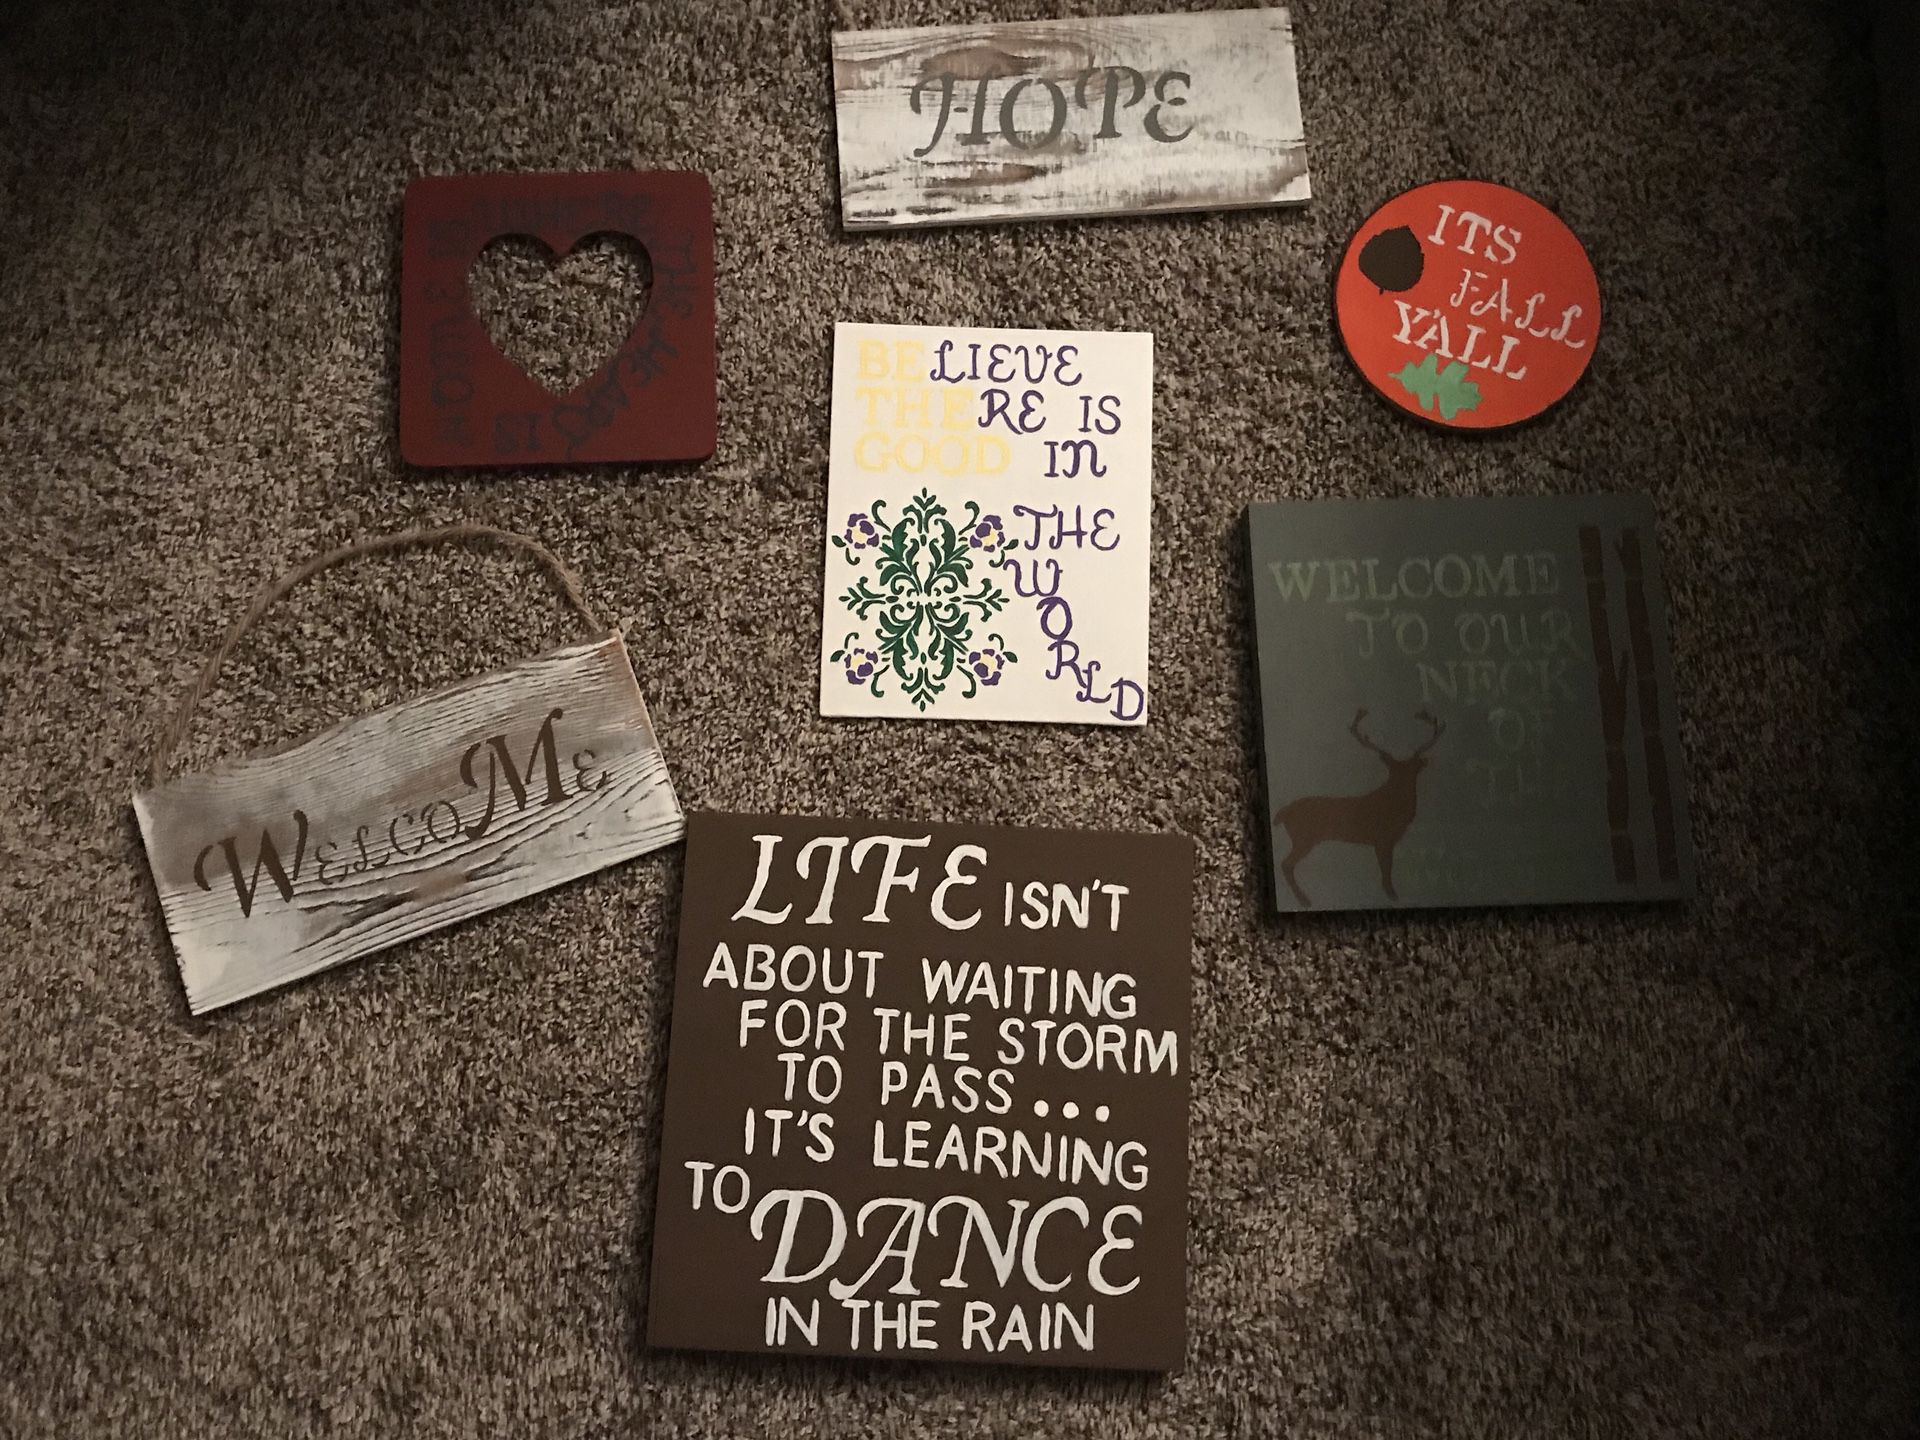 Homemade signs